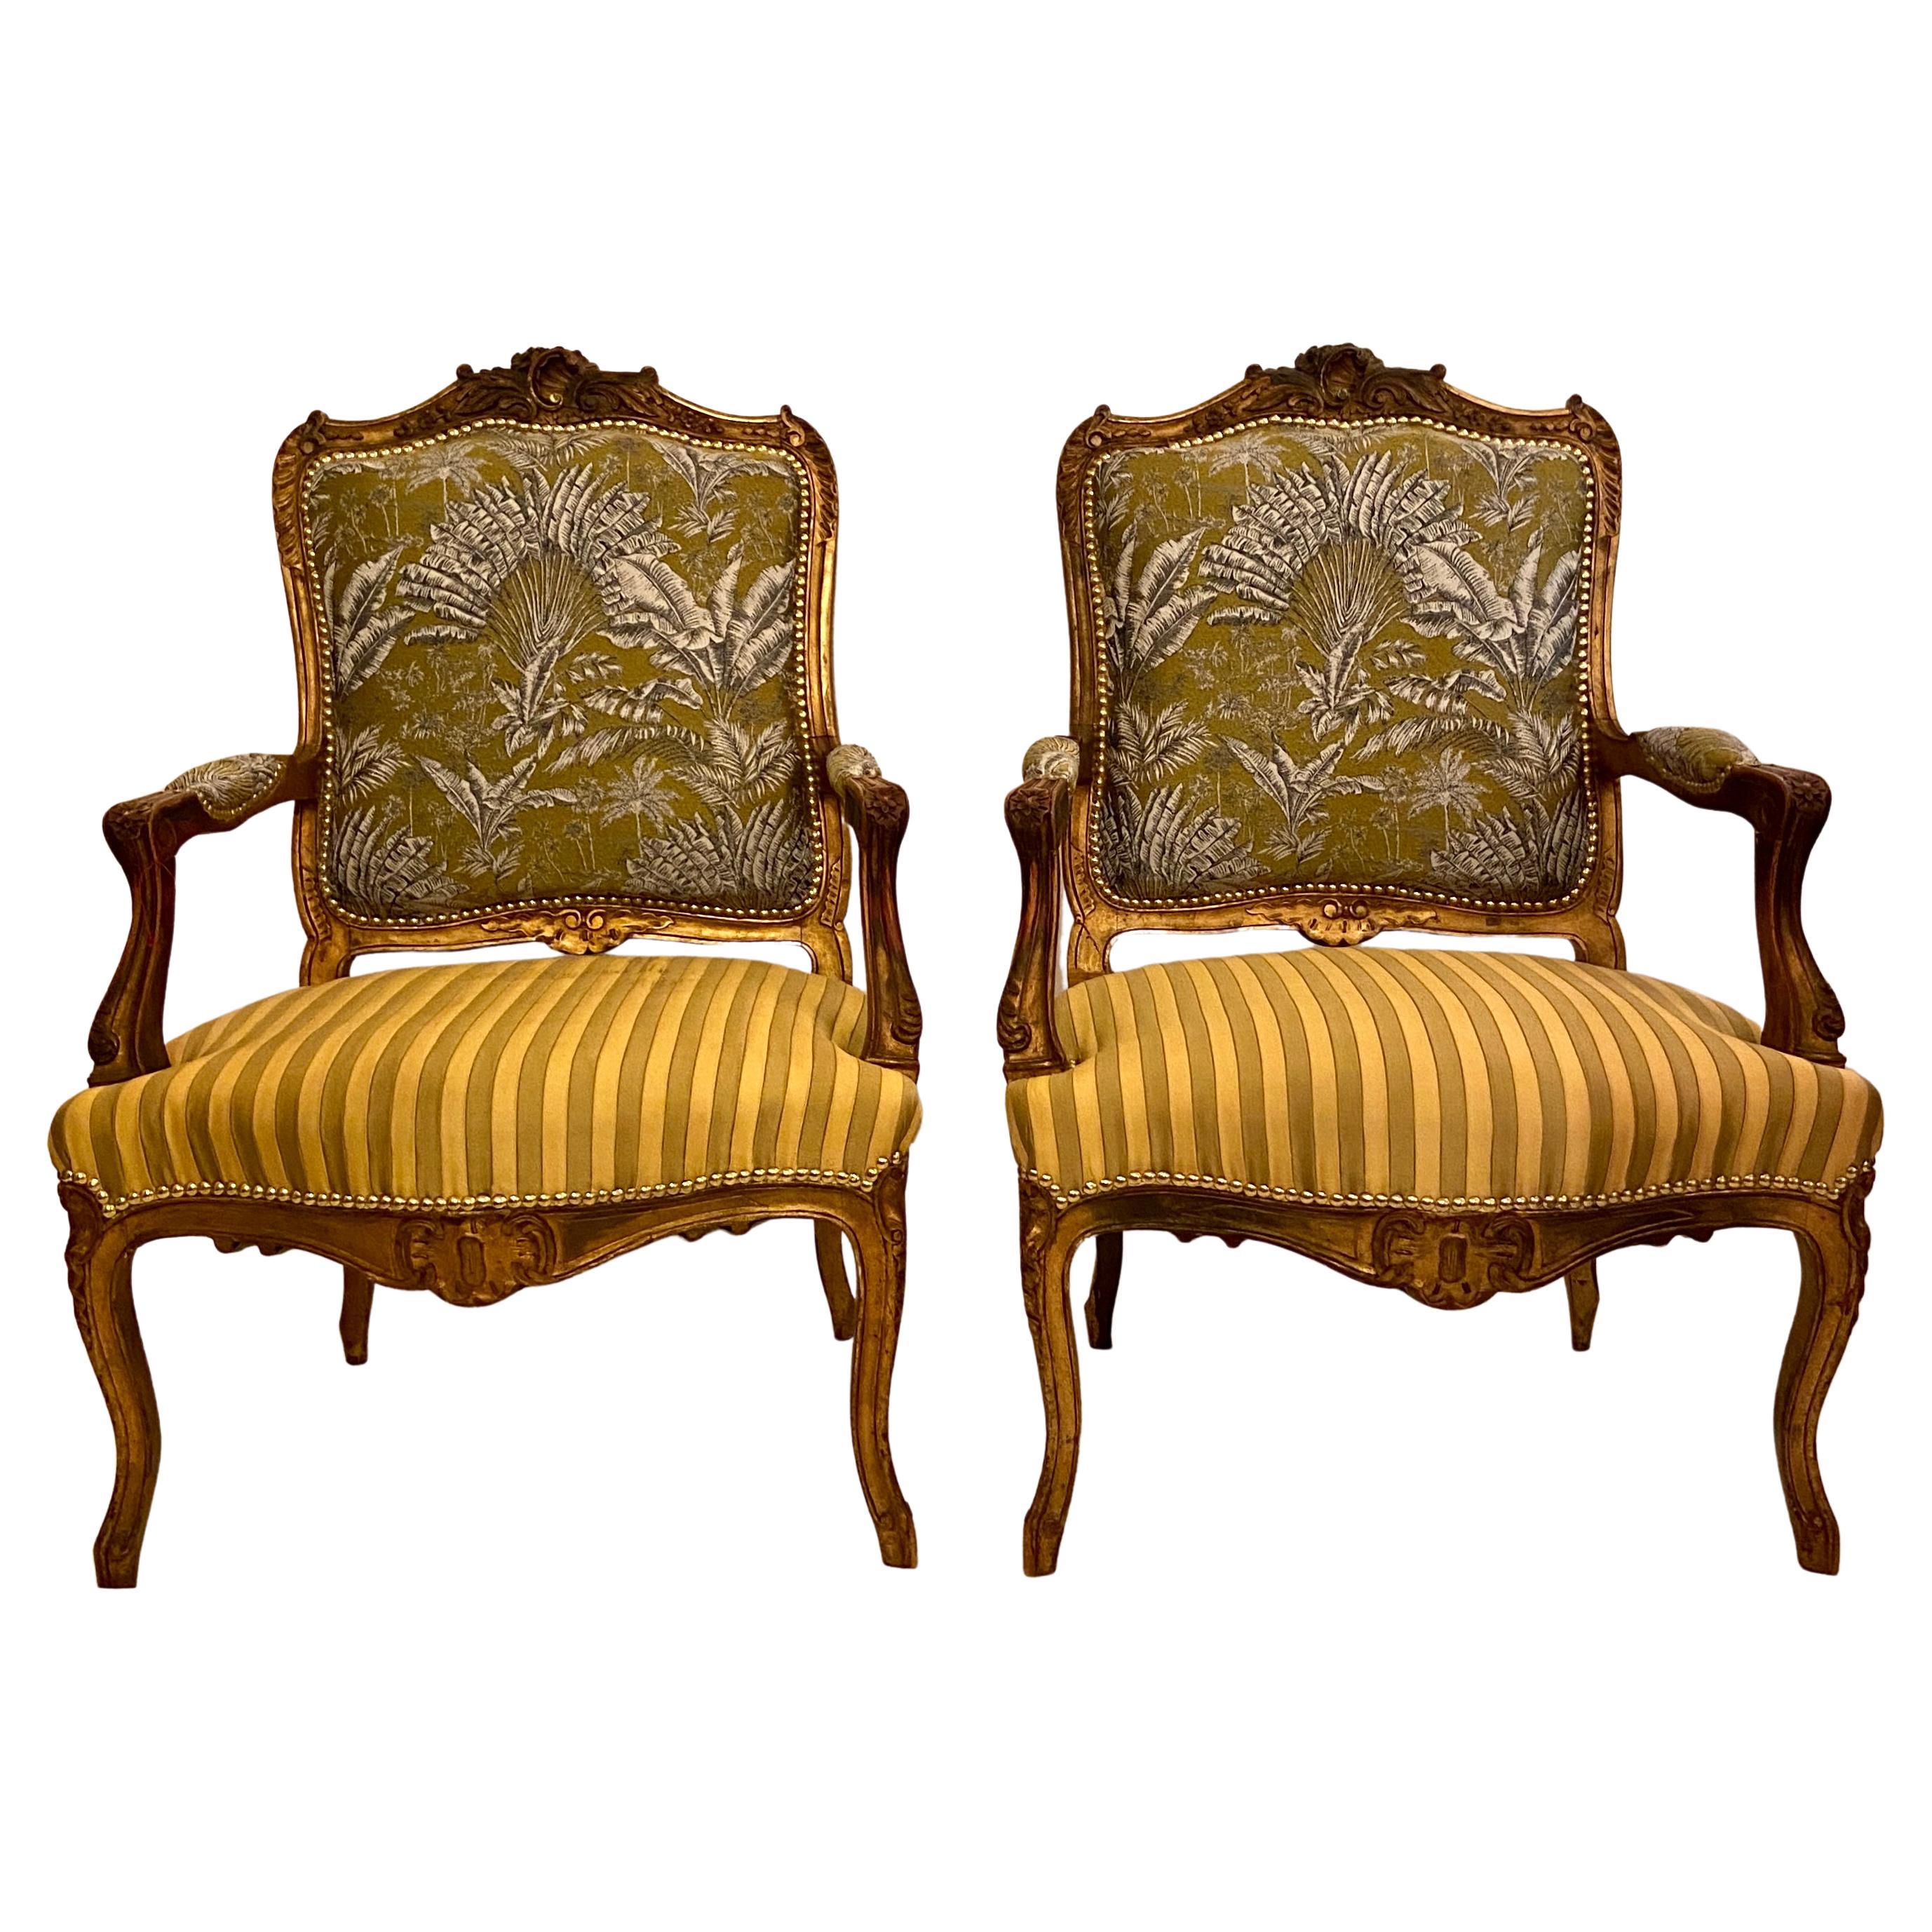 Pair Antique French Carved Walnut Upholstered Armchairs, circa 1860